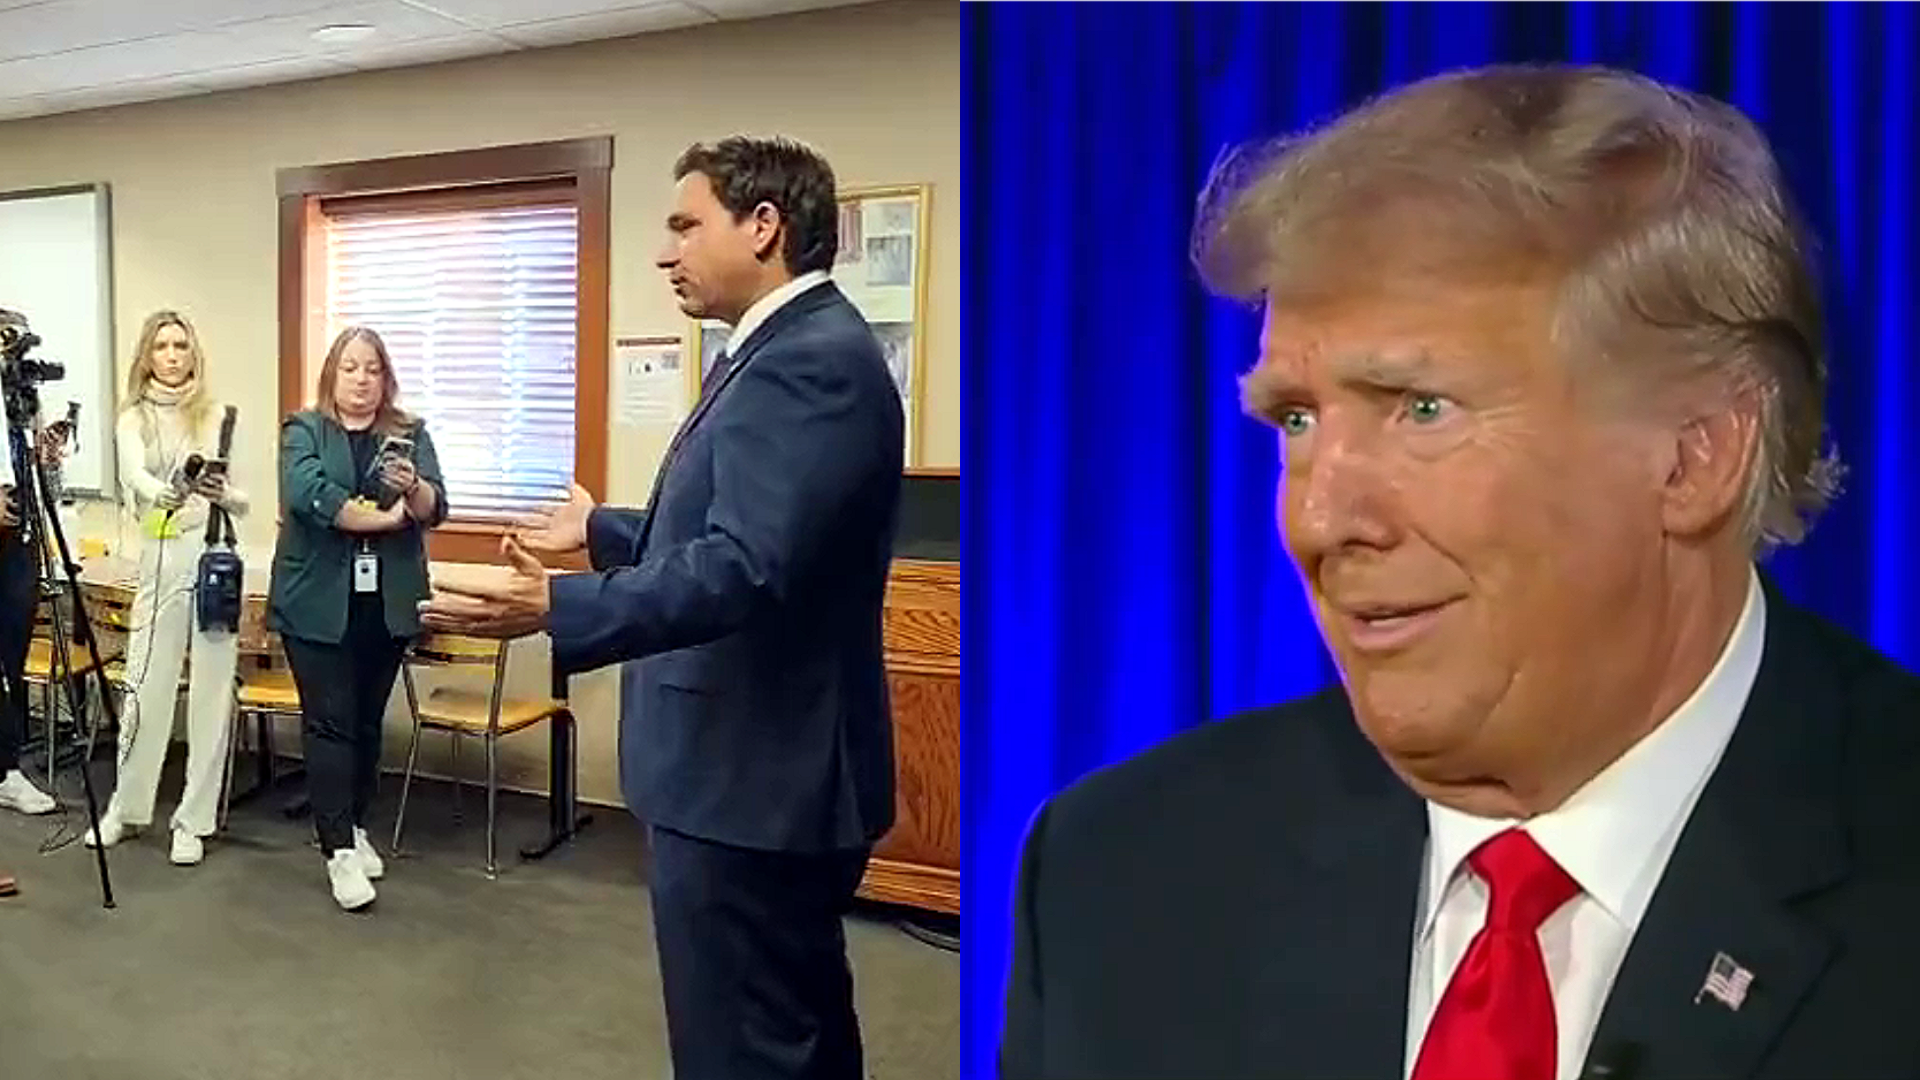 Trump Twists the Knife Into DeSantis Over Florida Senators’ Endorsement of Him: ‘They Know Something that Others Don’t’